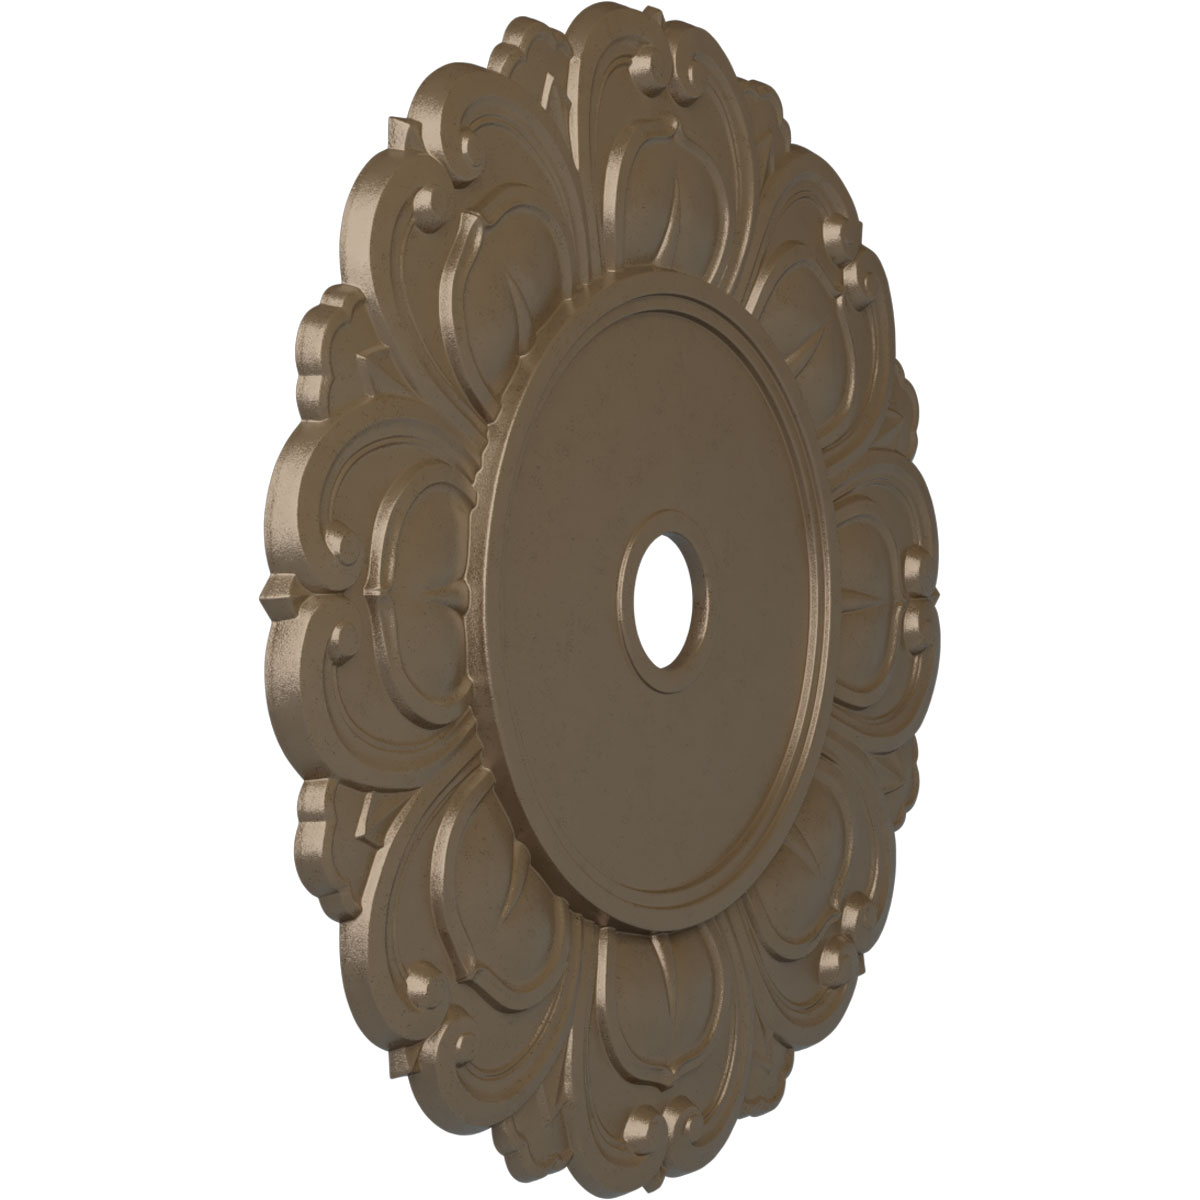 32 1/4"OD x 3 5/8"ID x 1 1/8"P Angel Ceiling Medallion (Fits Canopies up to 15 3/4"), Hand-Painted Warm Silver - image 2 of 5